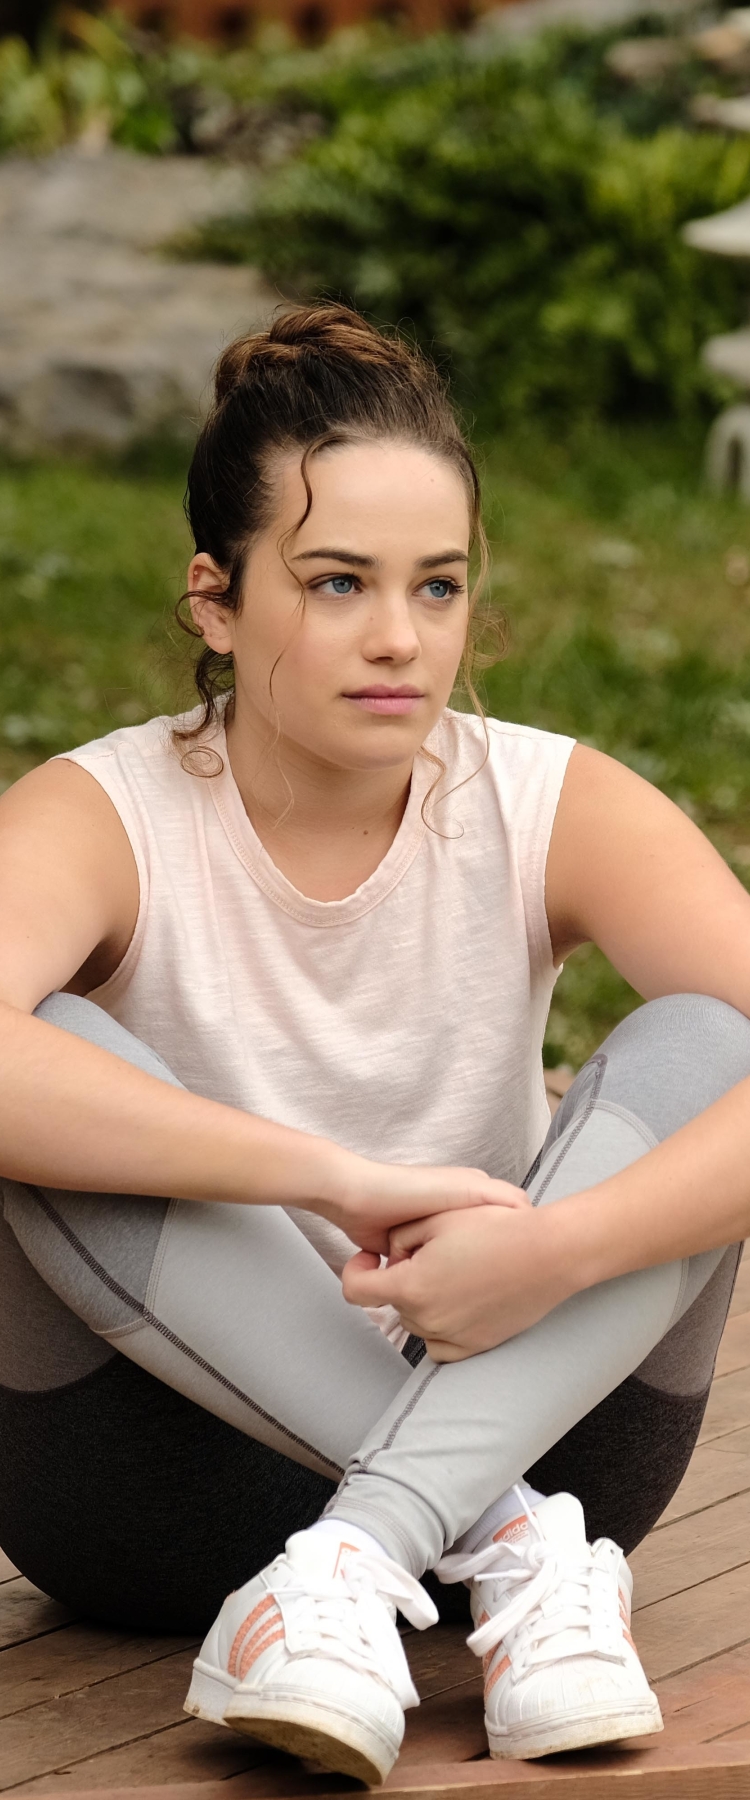 750x1800 Mary Mouser Cobra Kai 750x1800 Resolution Wallpaper Hd Tv Series 4k Wallpapers Images